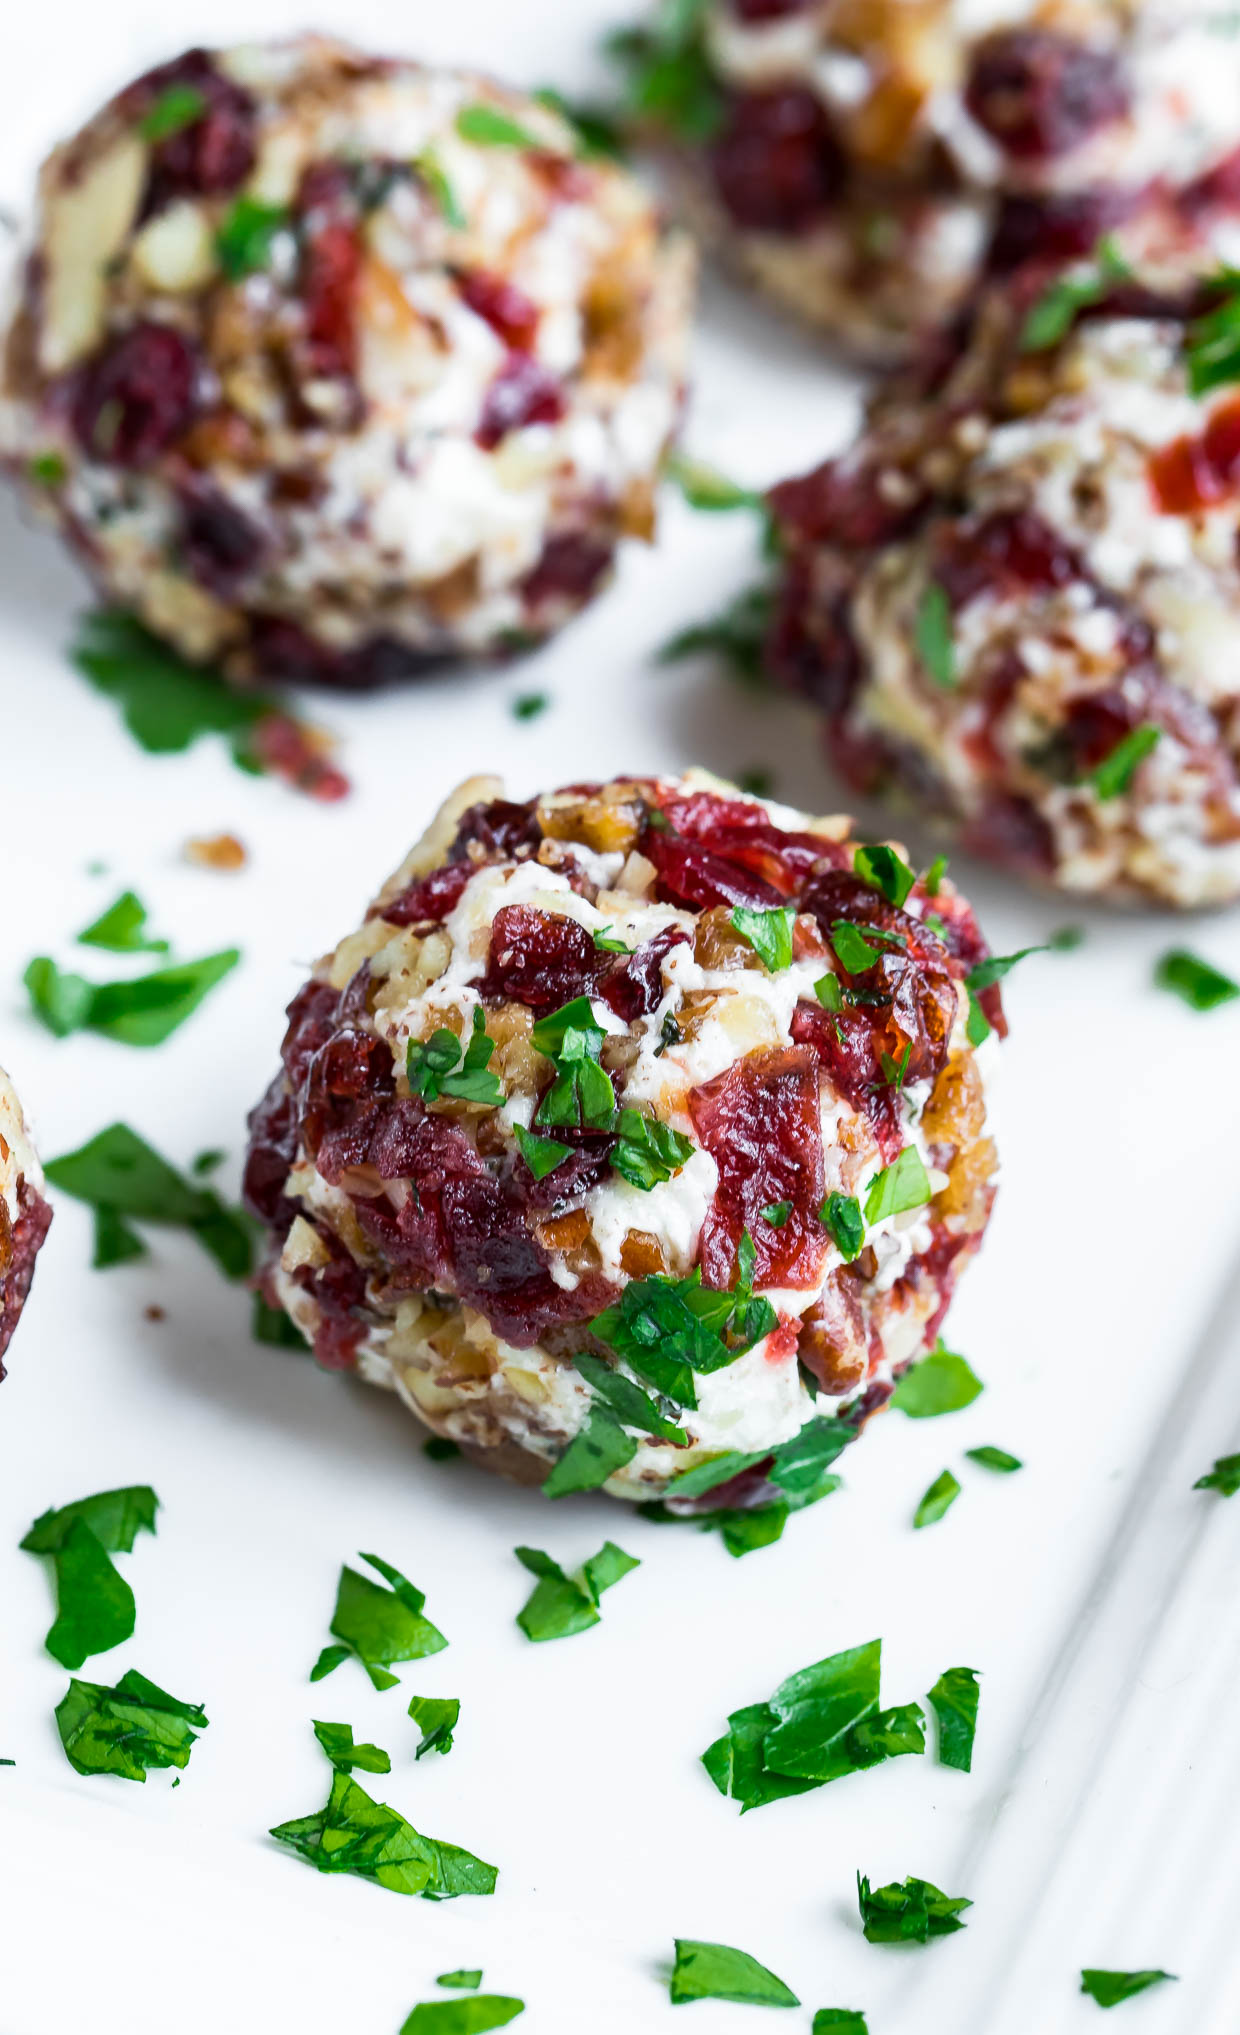 Quick, easy, and totally delicious, these Mini Candied Pecan Cranberry Goat Cheese Balls make a tasty party appetizer for fancy yet fuss-free entertaining! Ready in 10 minutes.